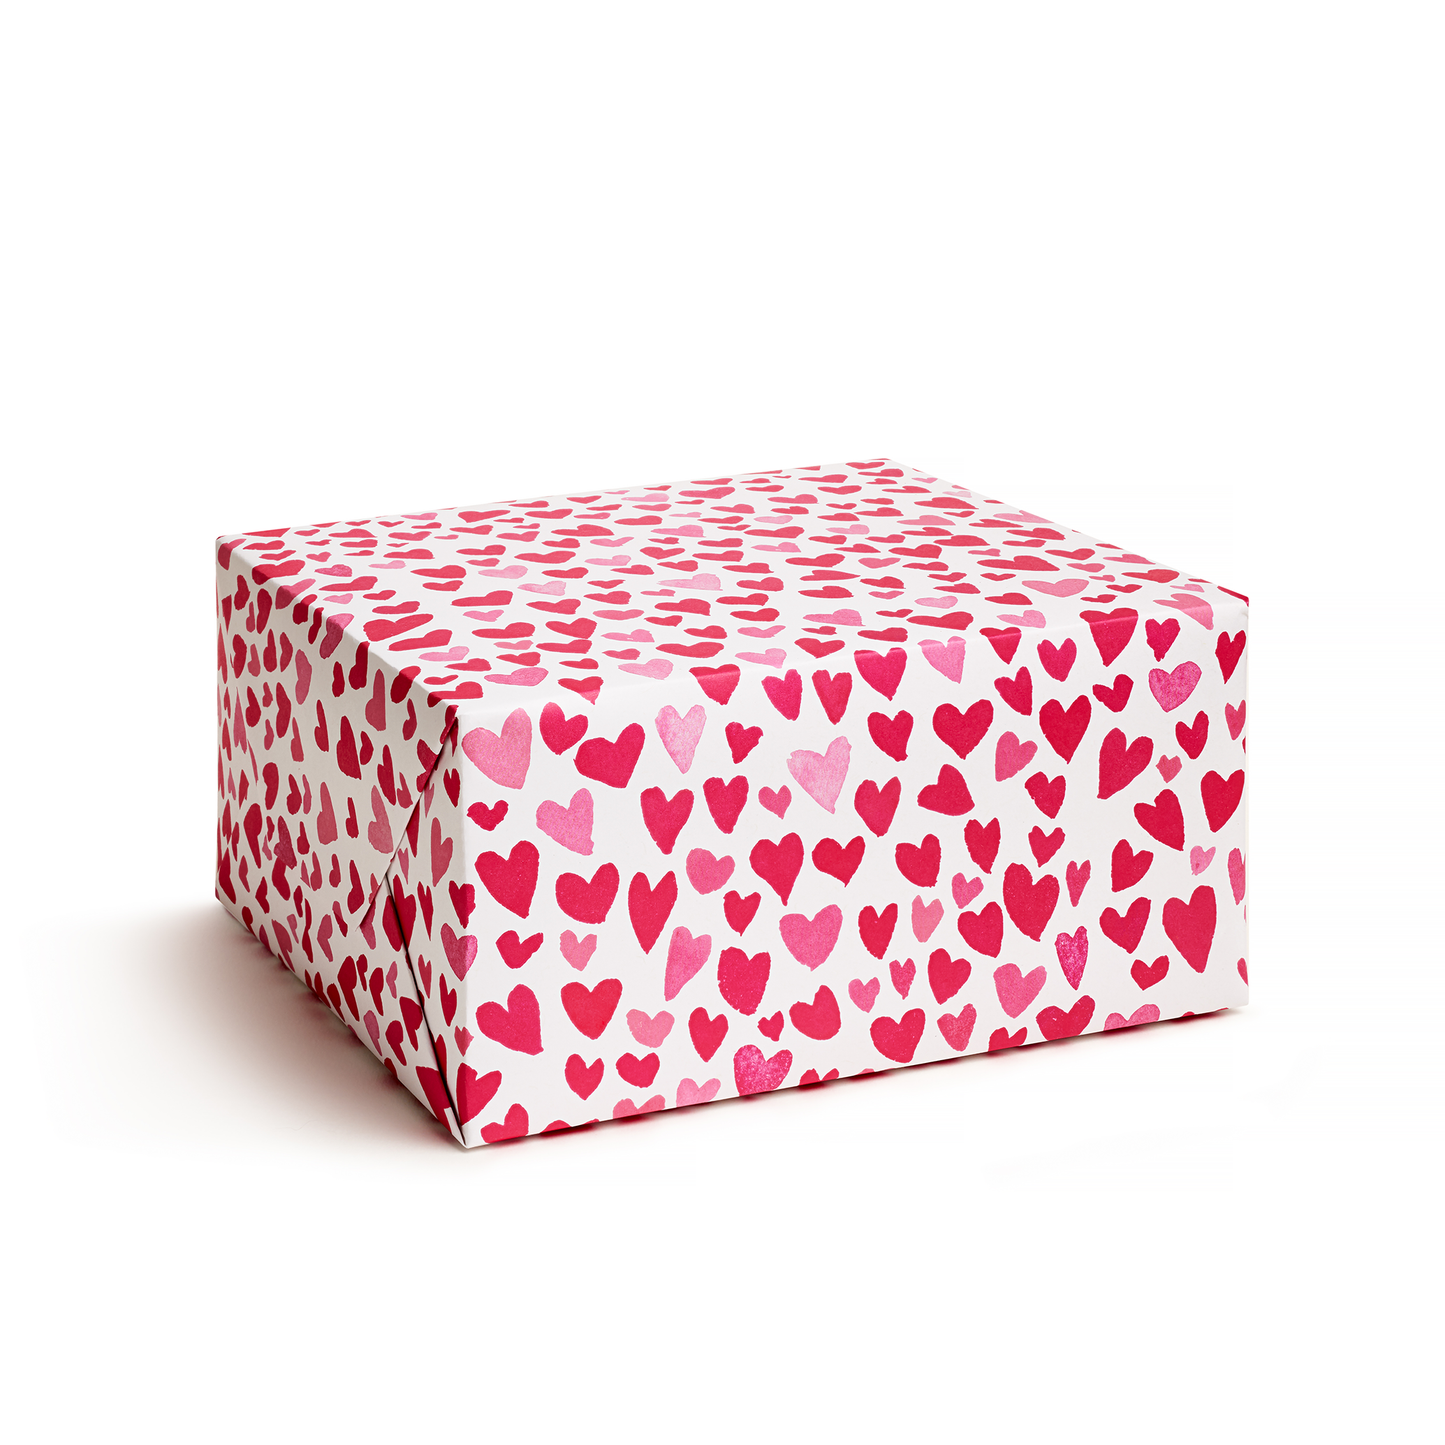 heart gift wrap wrapping paper sheets cute pink red hearts valentines vday